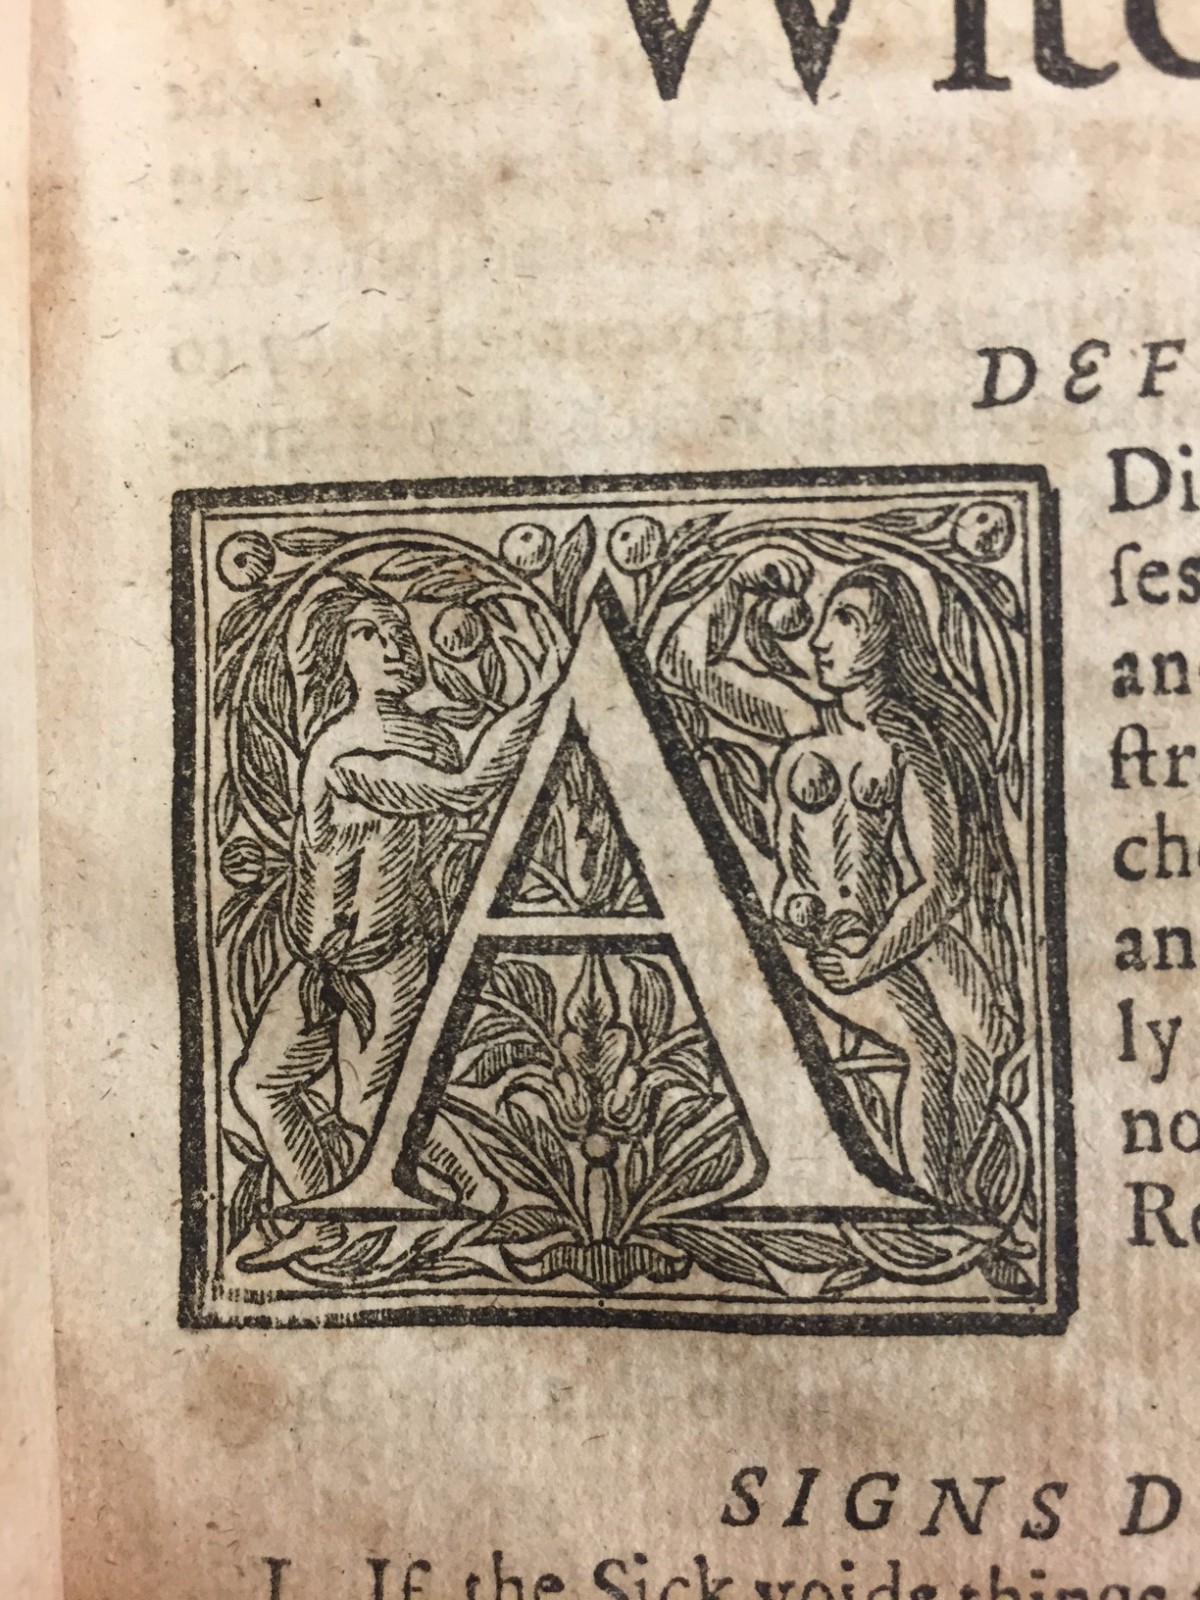 The historiated capital at the beginning of the text depicts Adam and Eve in the Garden of Eden at the moment of the Fall, when Eve eats the fruit of the Tree of the Knowledge of Good and Evil.  Perhaps Drage references his own knowledge he is sharing with his readers on the topic of witchcraft and remedy, or perhaps he is alluding to the moment when sin entered the world.